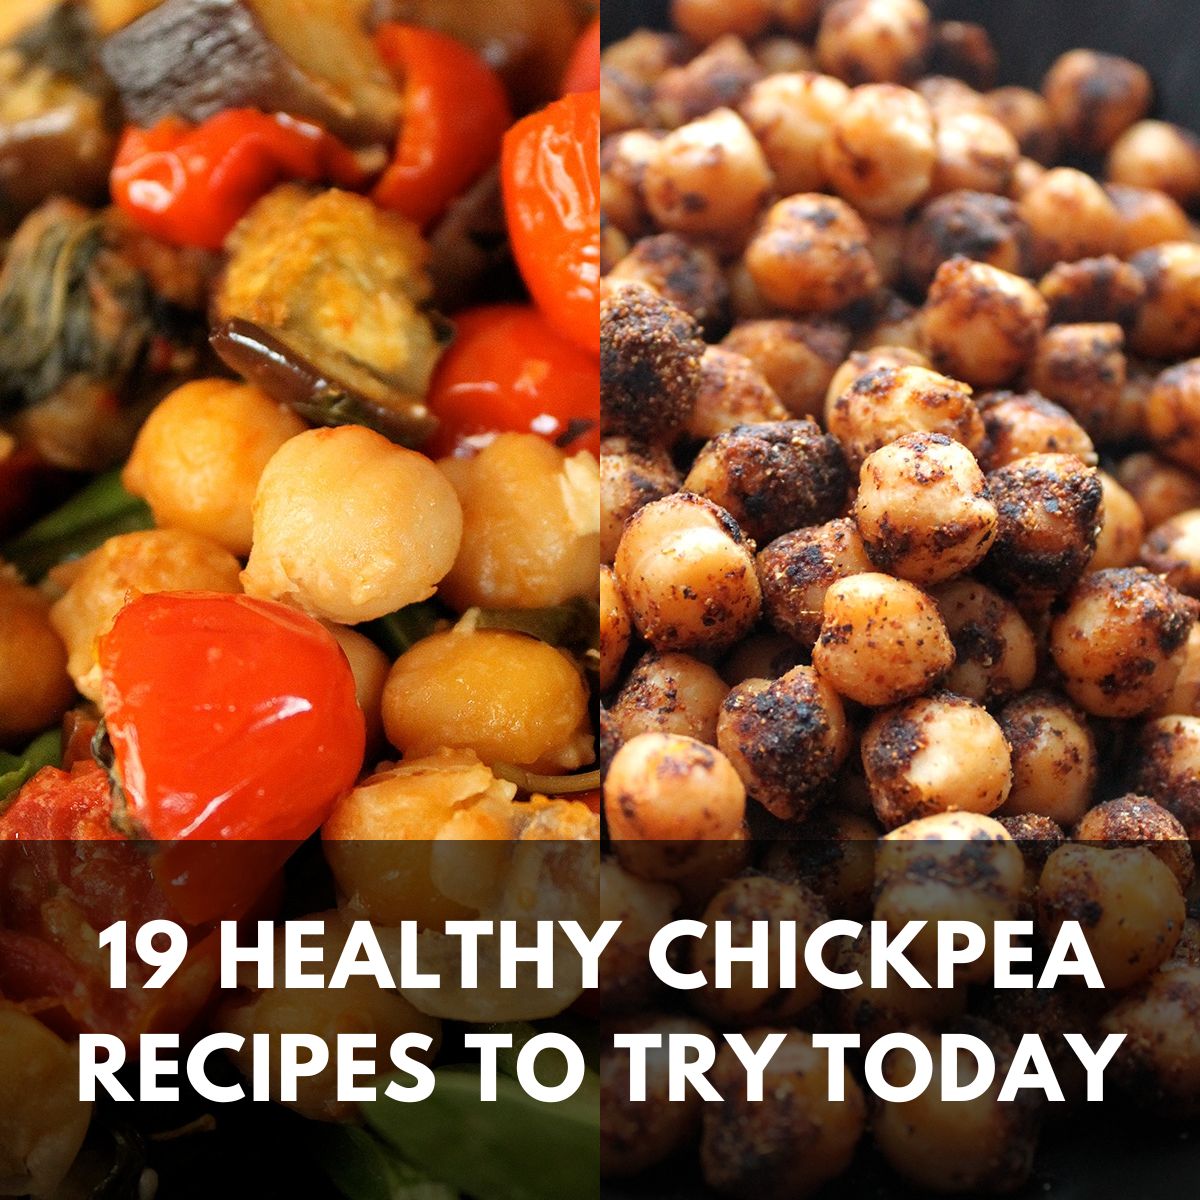 19 healthy chickpea recipes to try today main